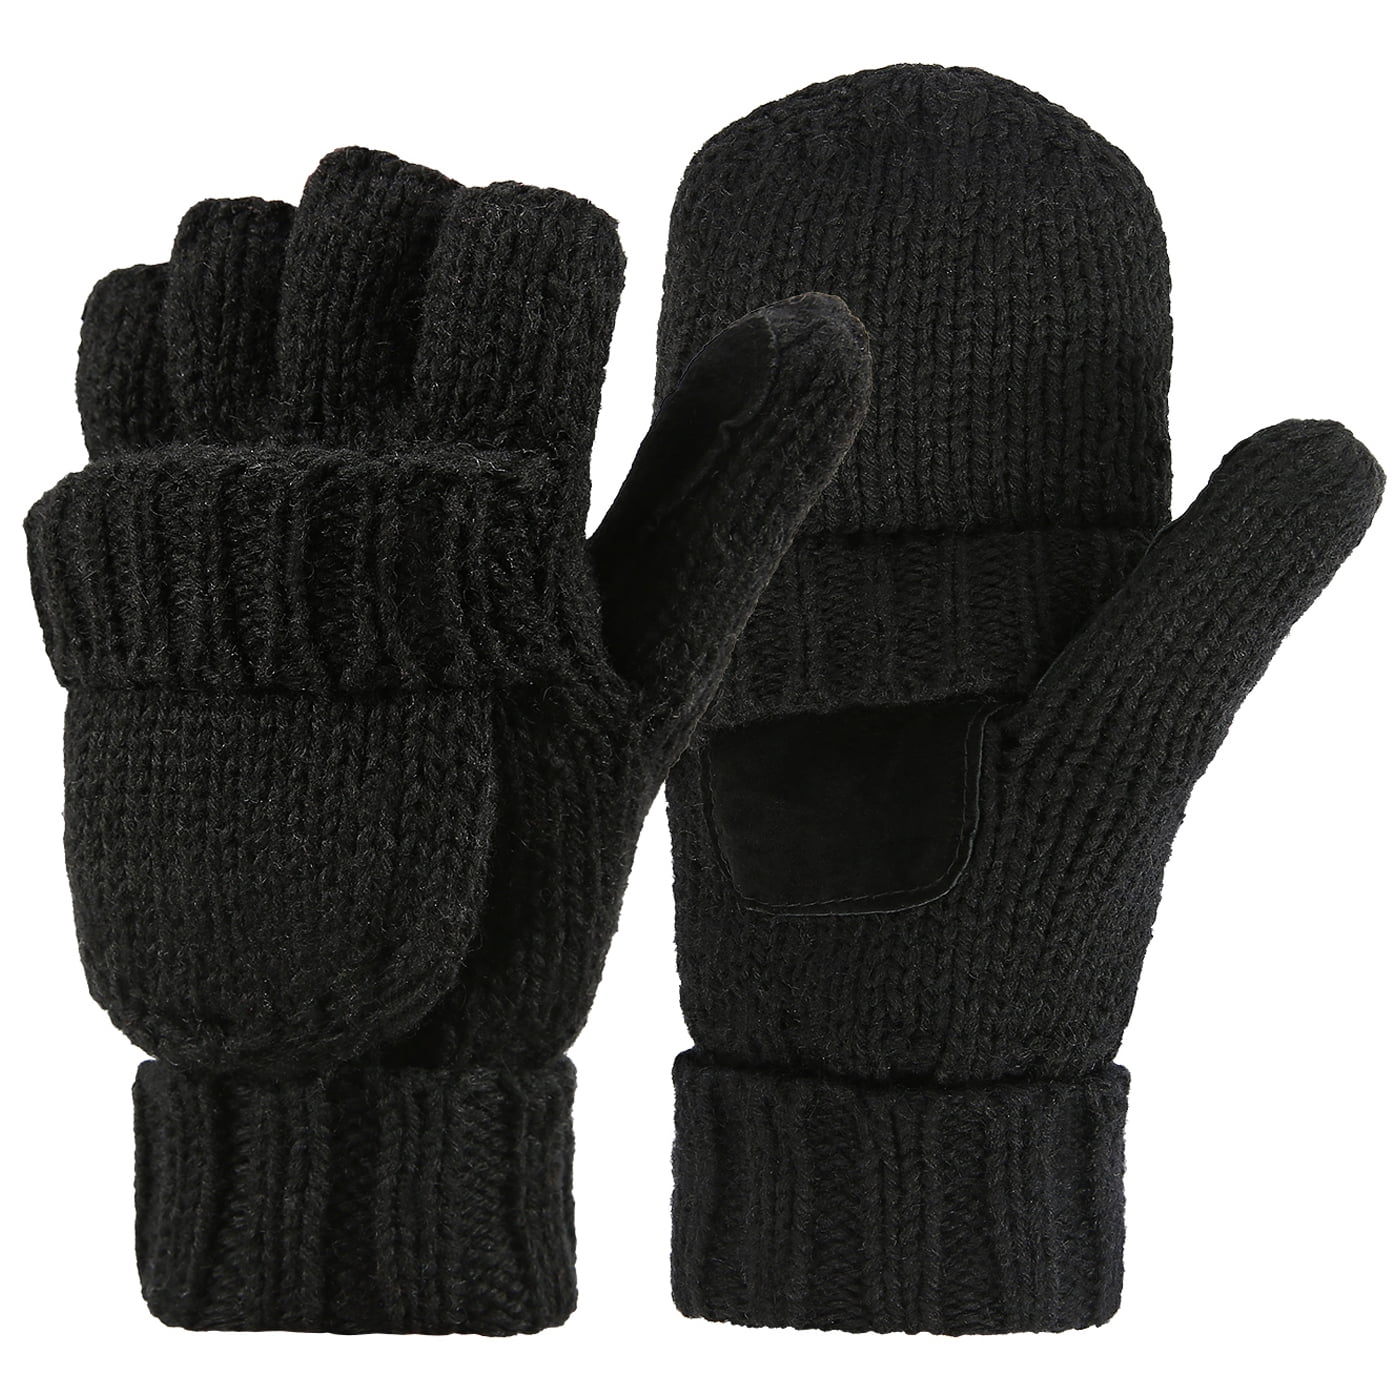 Women Knitted Convertible Fingerless Gloves Winter Wool Warm Fingerless Gloves With Mittens Cover Buttoned Ladies Thermal Converter Fingerless Cable Knit Half-Finger Gloves Driving Gloves 